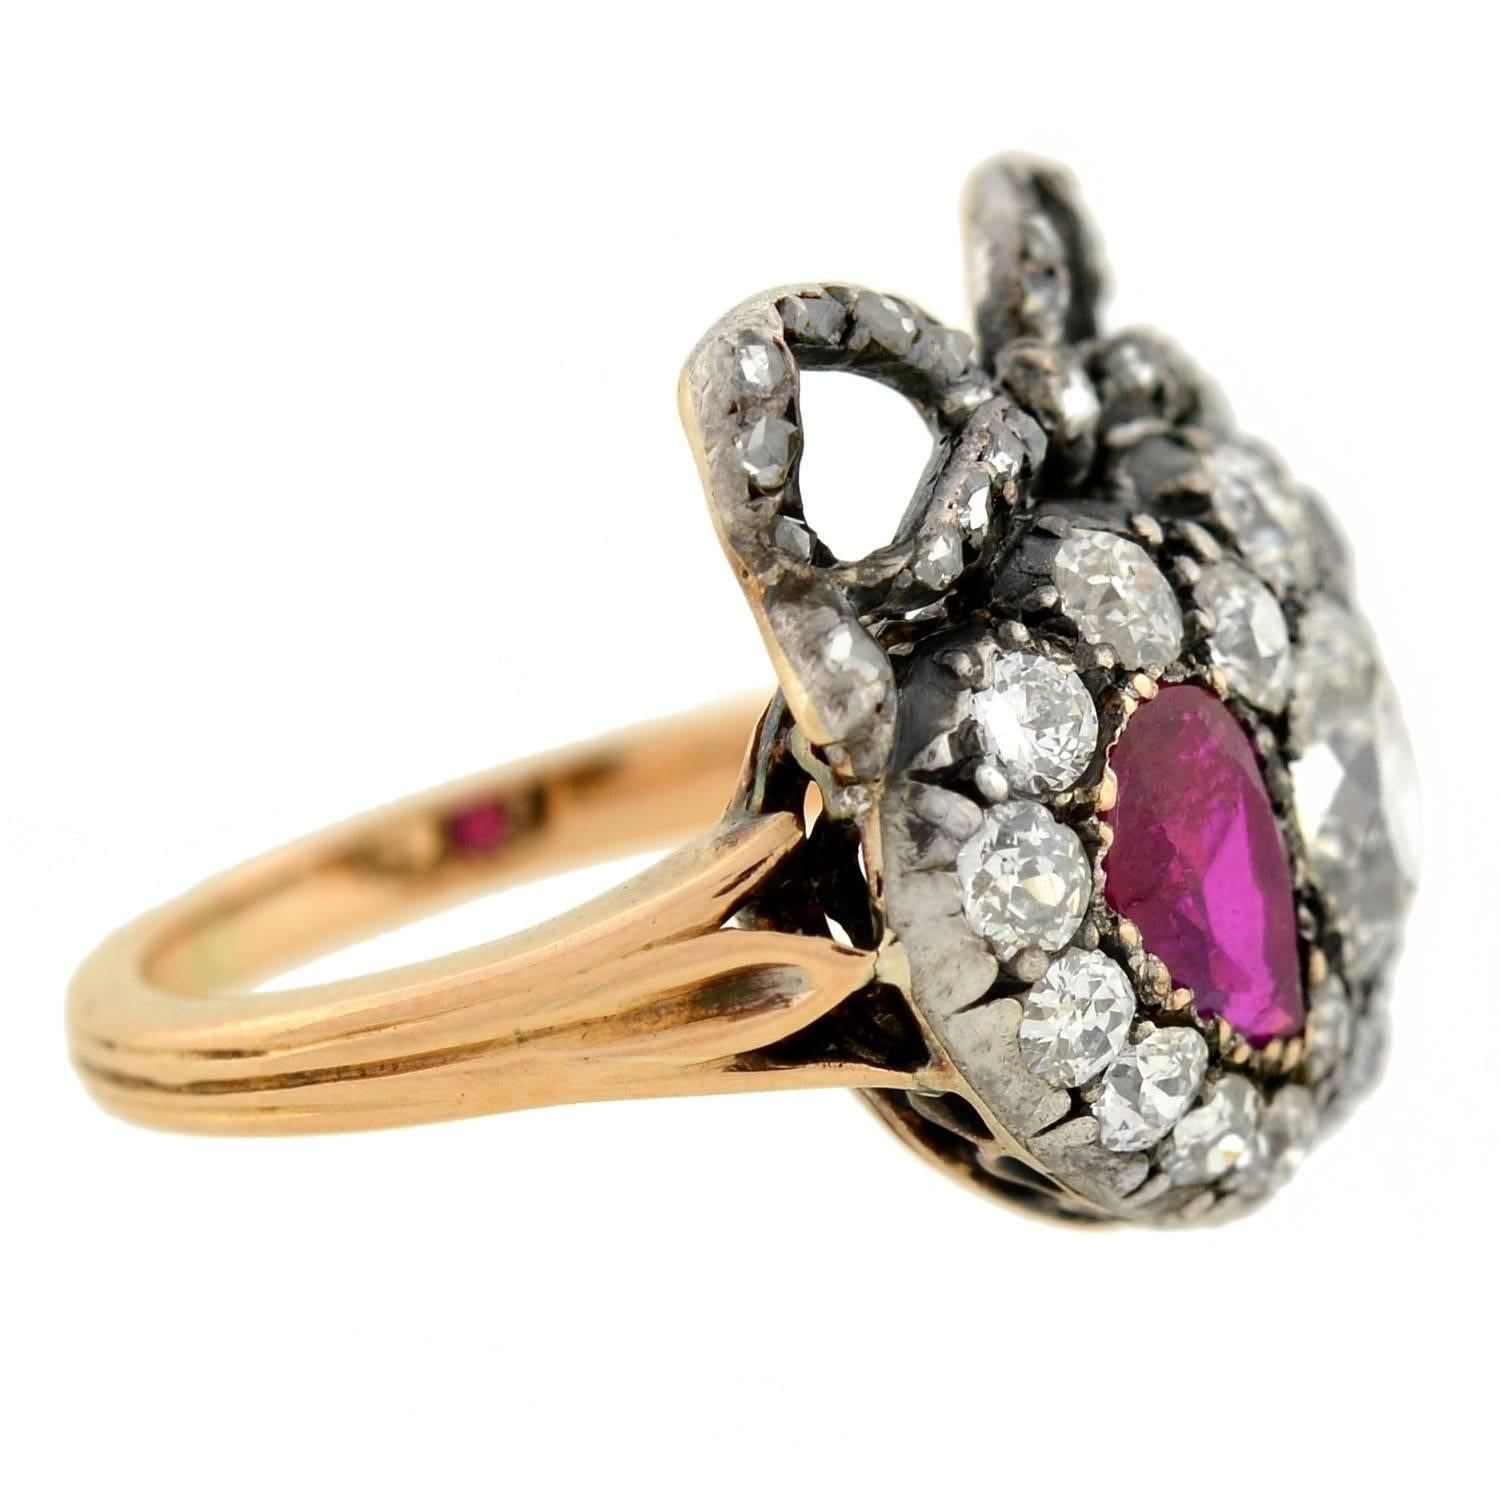 An absolutely exquisite diamond and ruby ring from the Victorian (ca1880) era! This breathtaking piece is made of sterling topped 15kt rose gold and has an incredible design. With a very royal appearance, a double heart centerpiece is the main focal